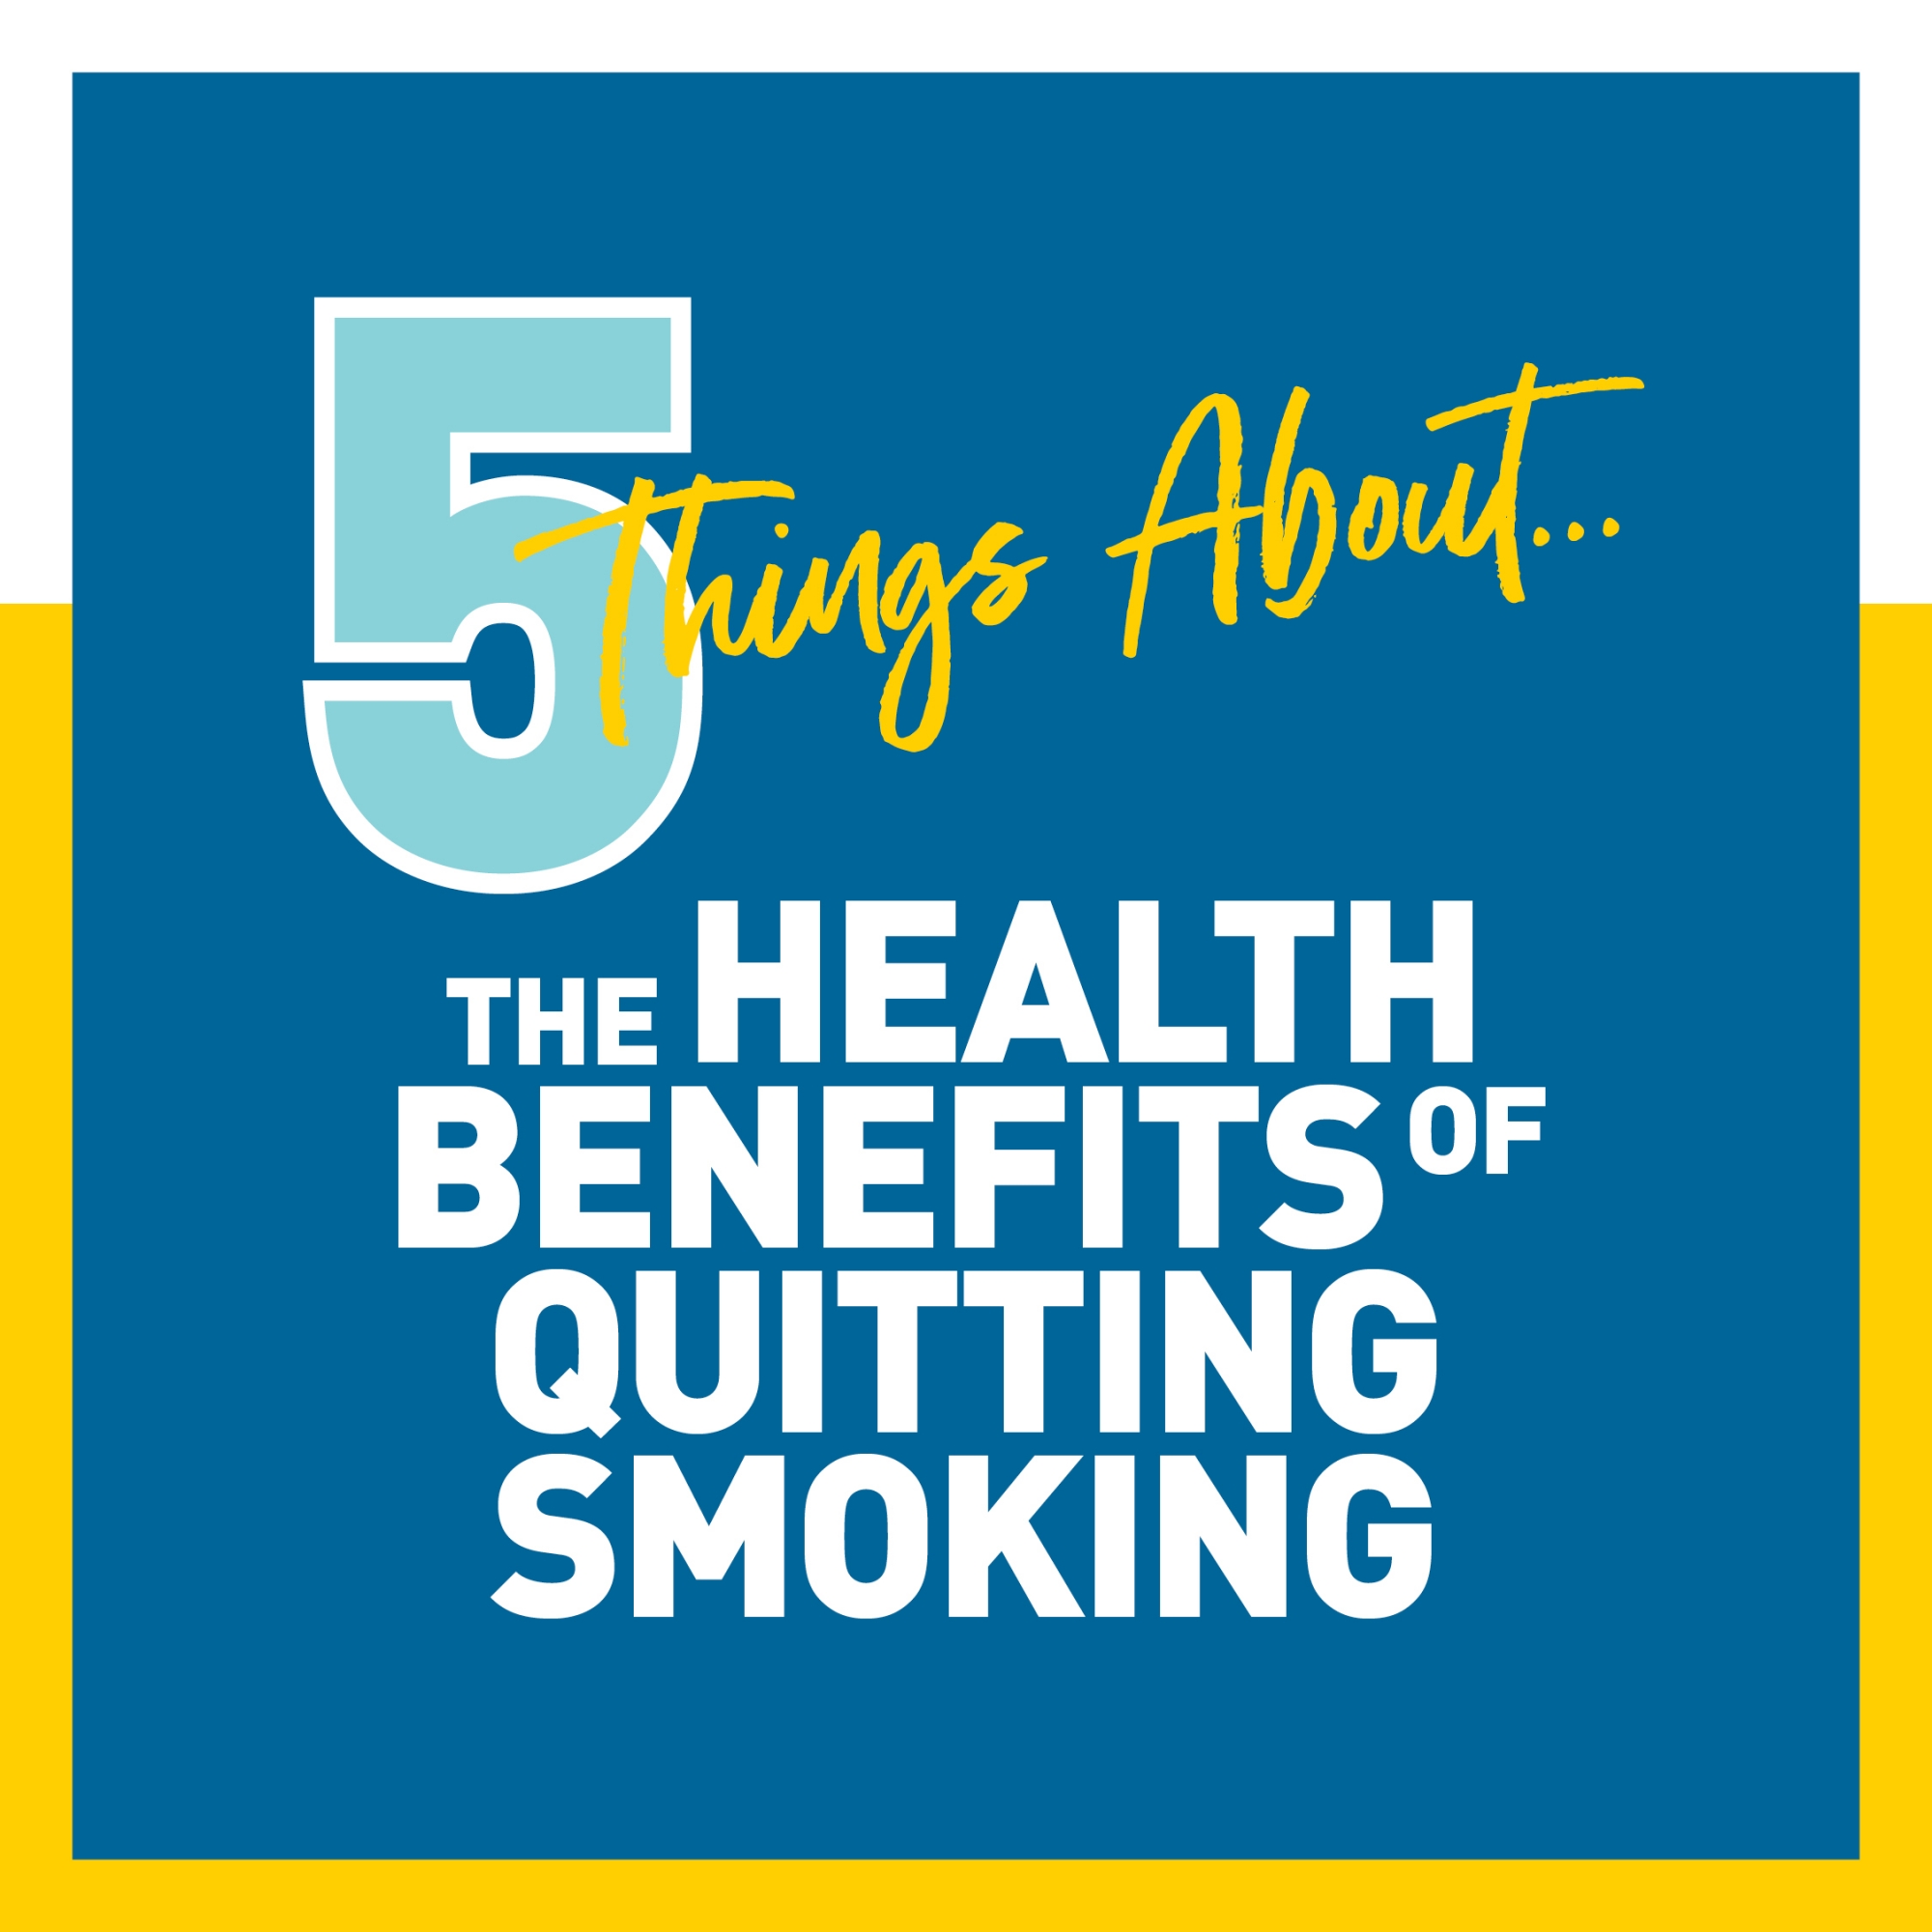 5 Things About the Health Benefits of Quitting Smoking